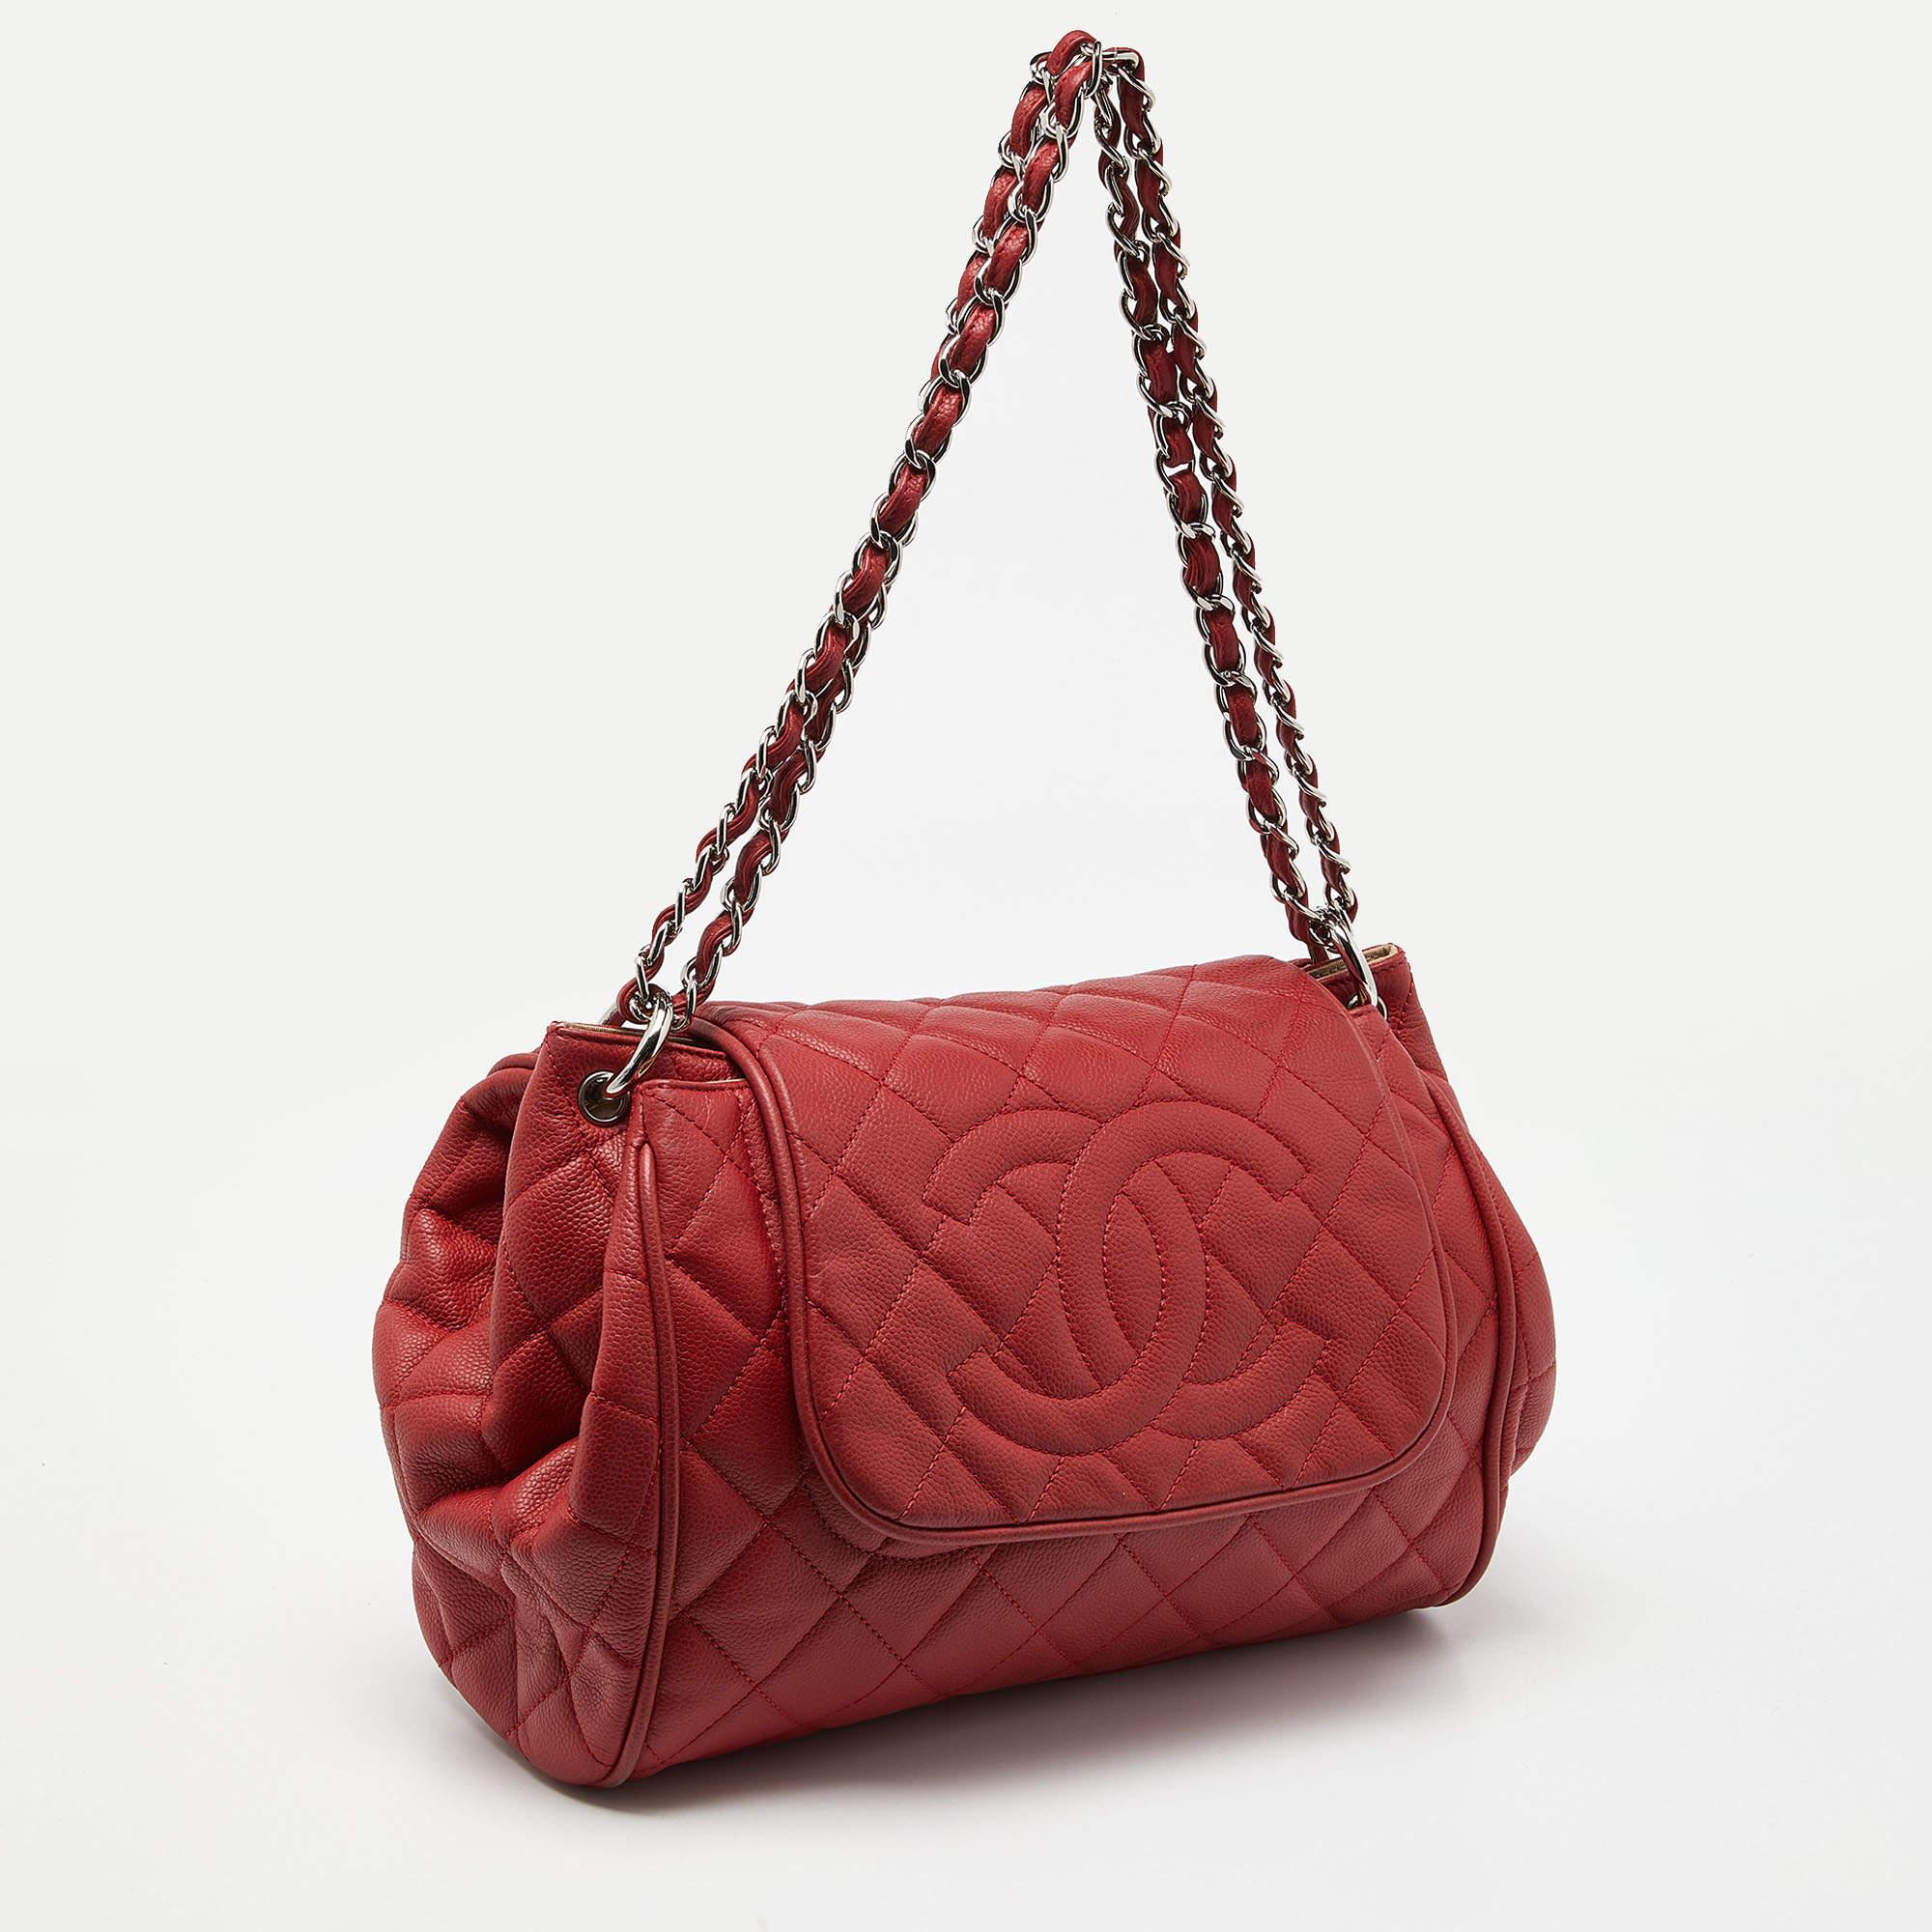 Chanel Red Quilted Caviar Leather Timeless Accordion Flap Bag In Fair Condition For Sale In Dubai, Al Qouz 2